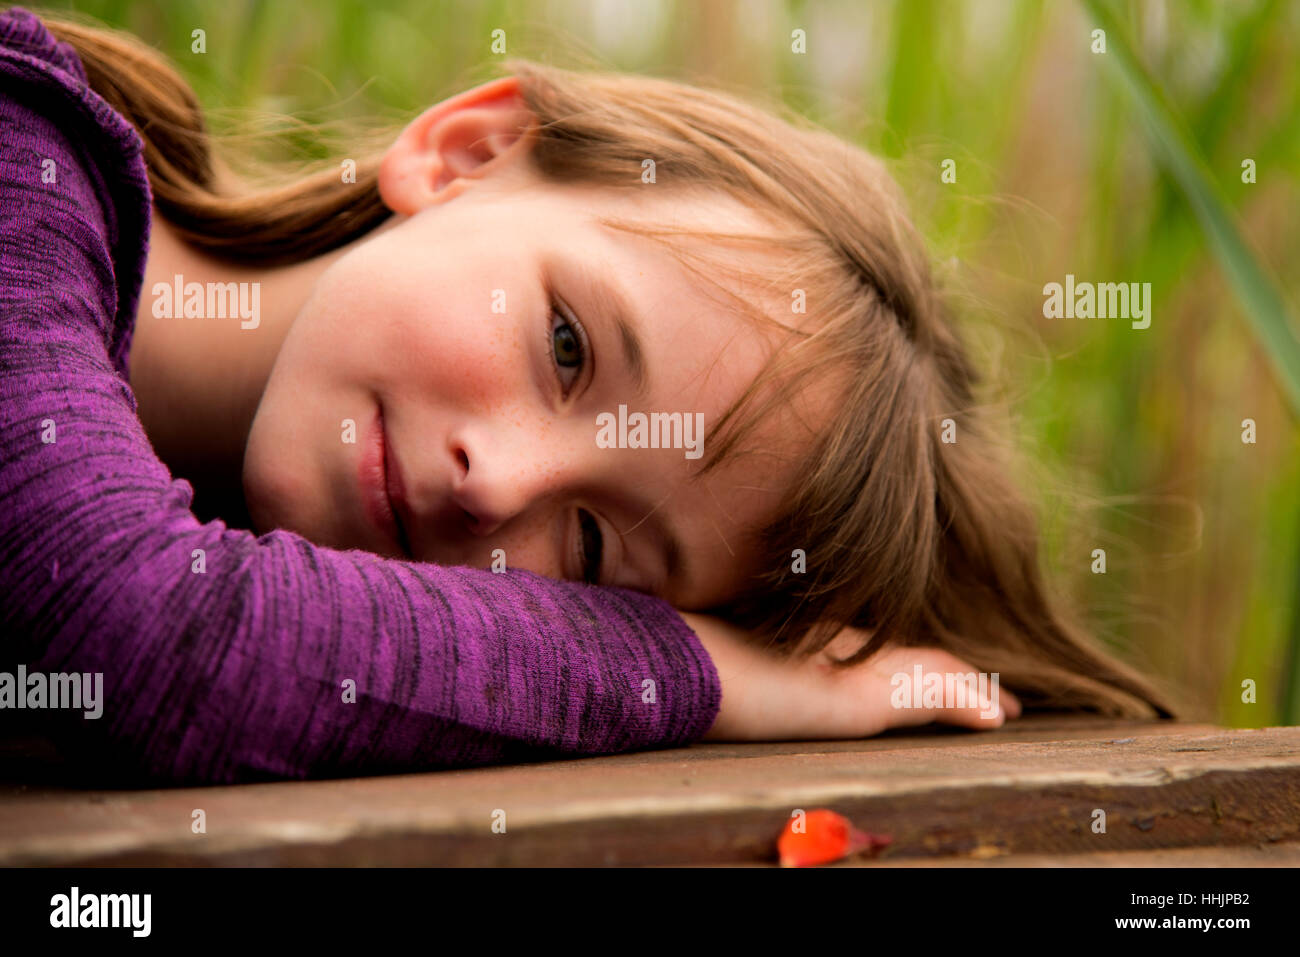 Young girl smiling and being happy. Lying on arms in a pose. Stock Photo